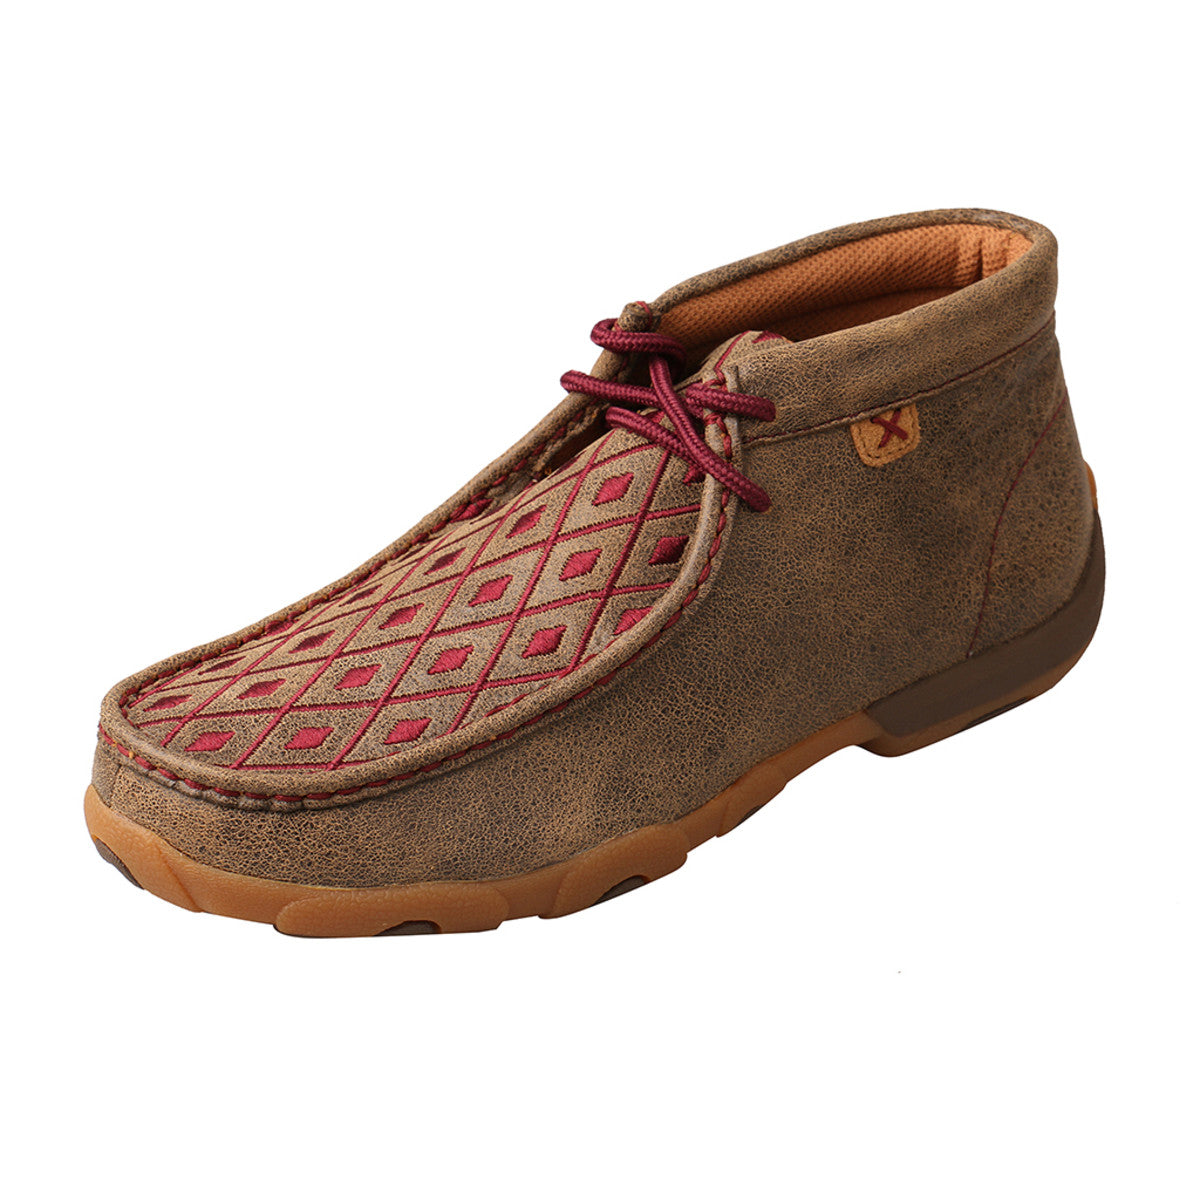 Women's Twisted X Chukka Driving Moccasins Shoe in Bomber & Mahogany from the side view